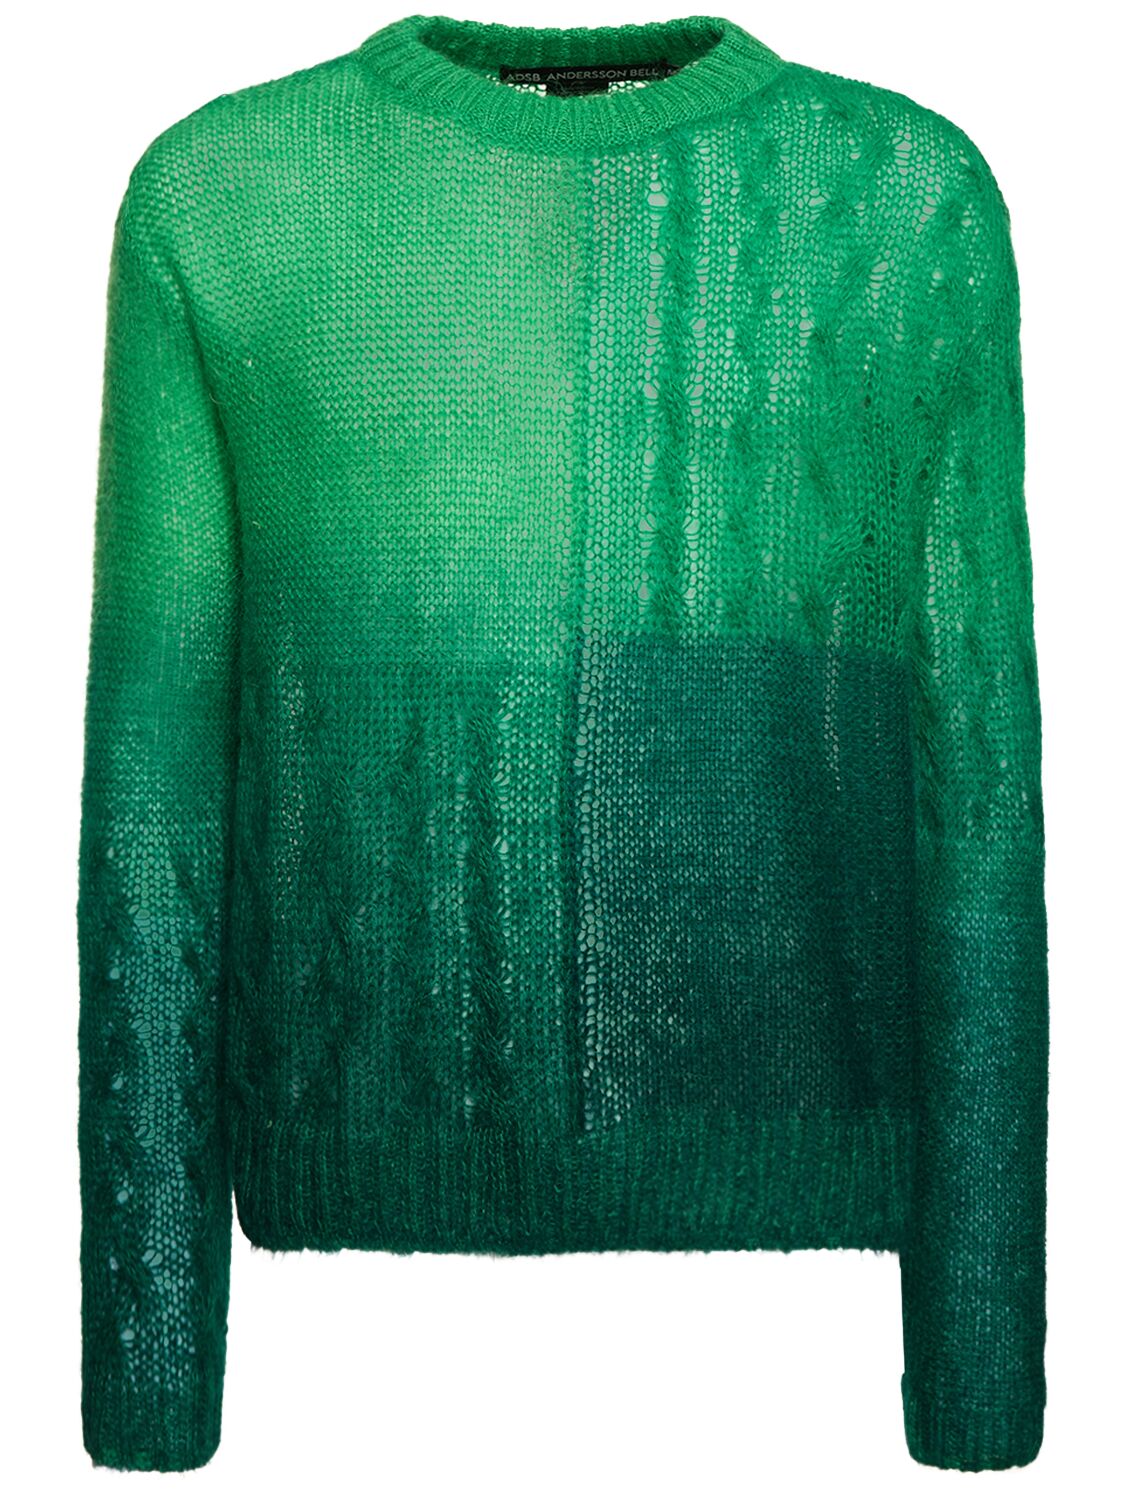 Image of Foresk Mohair Blend Knit Sweater